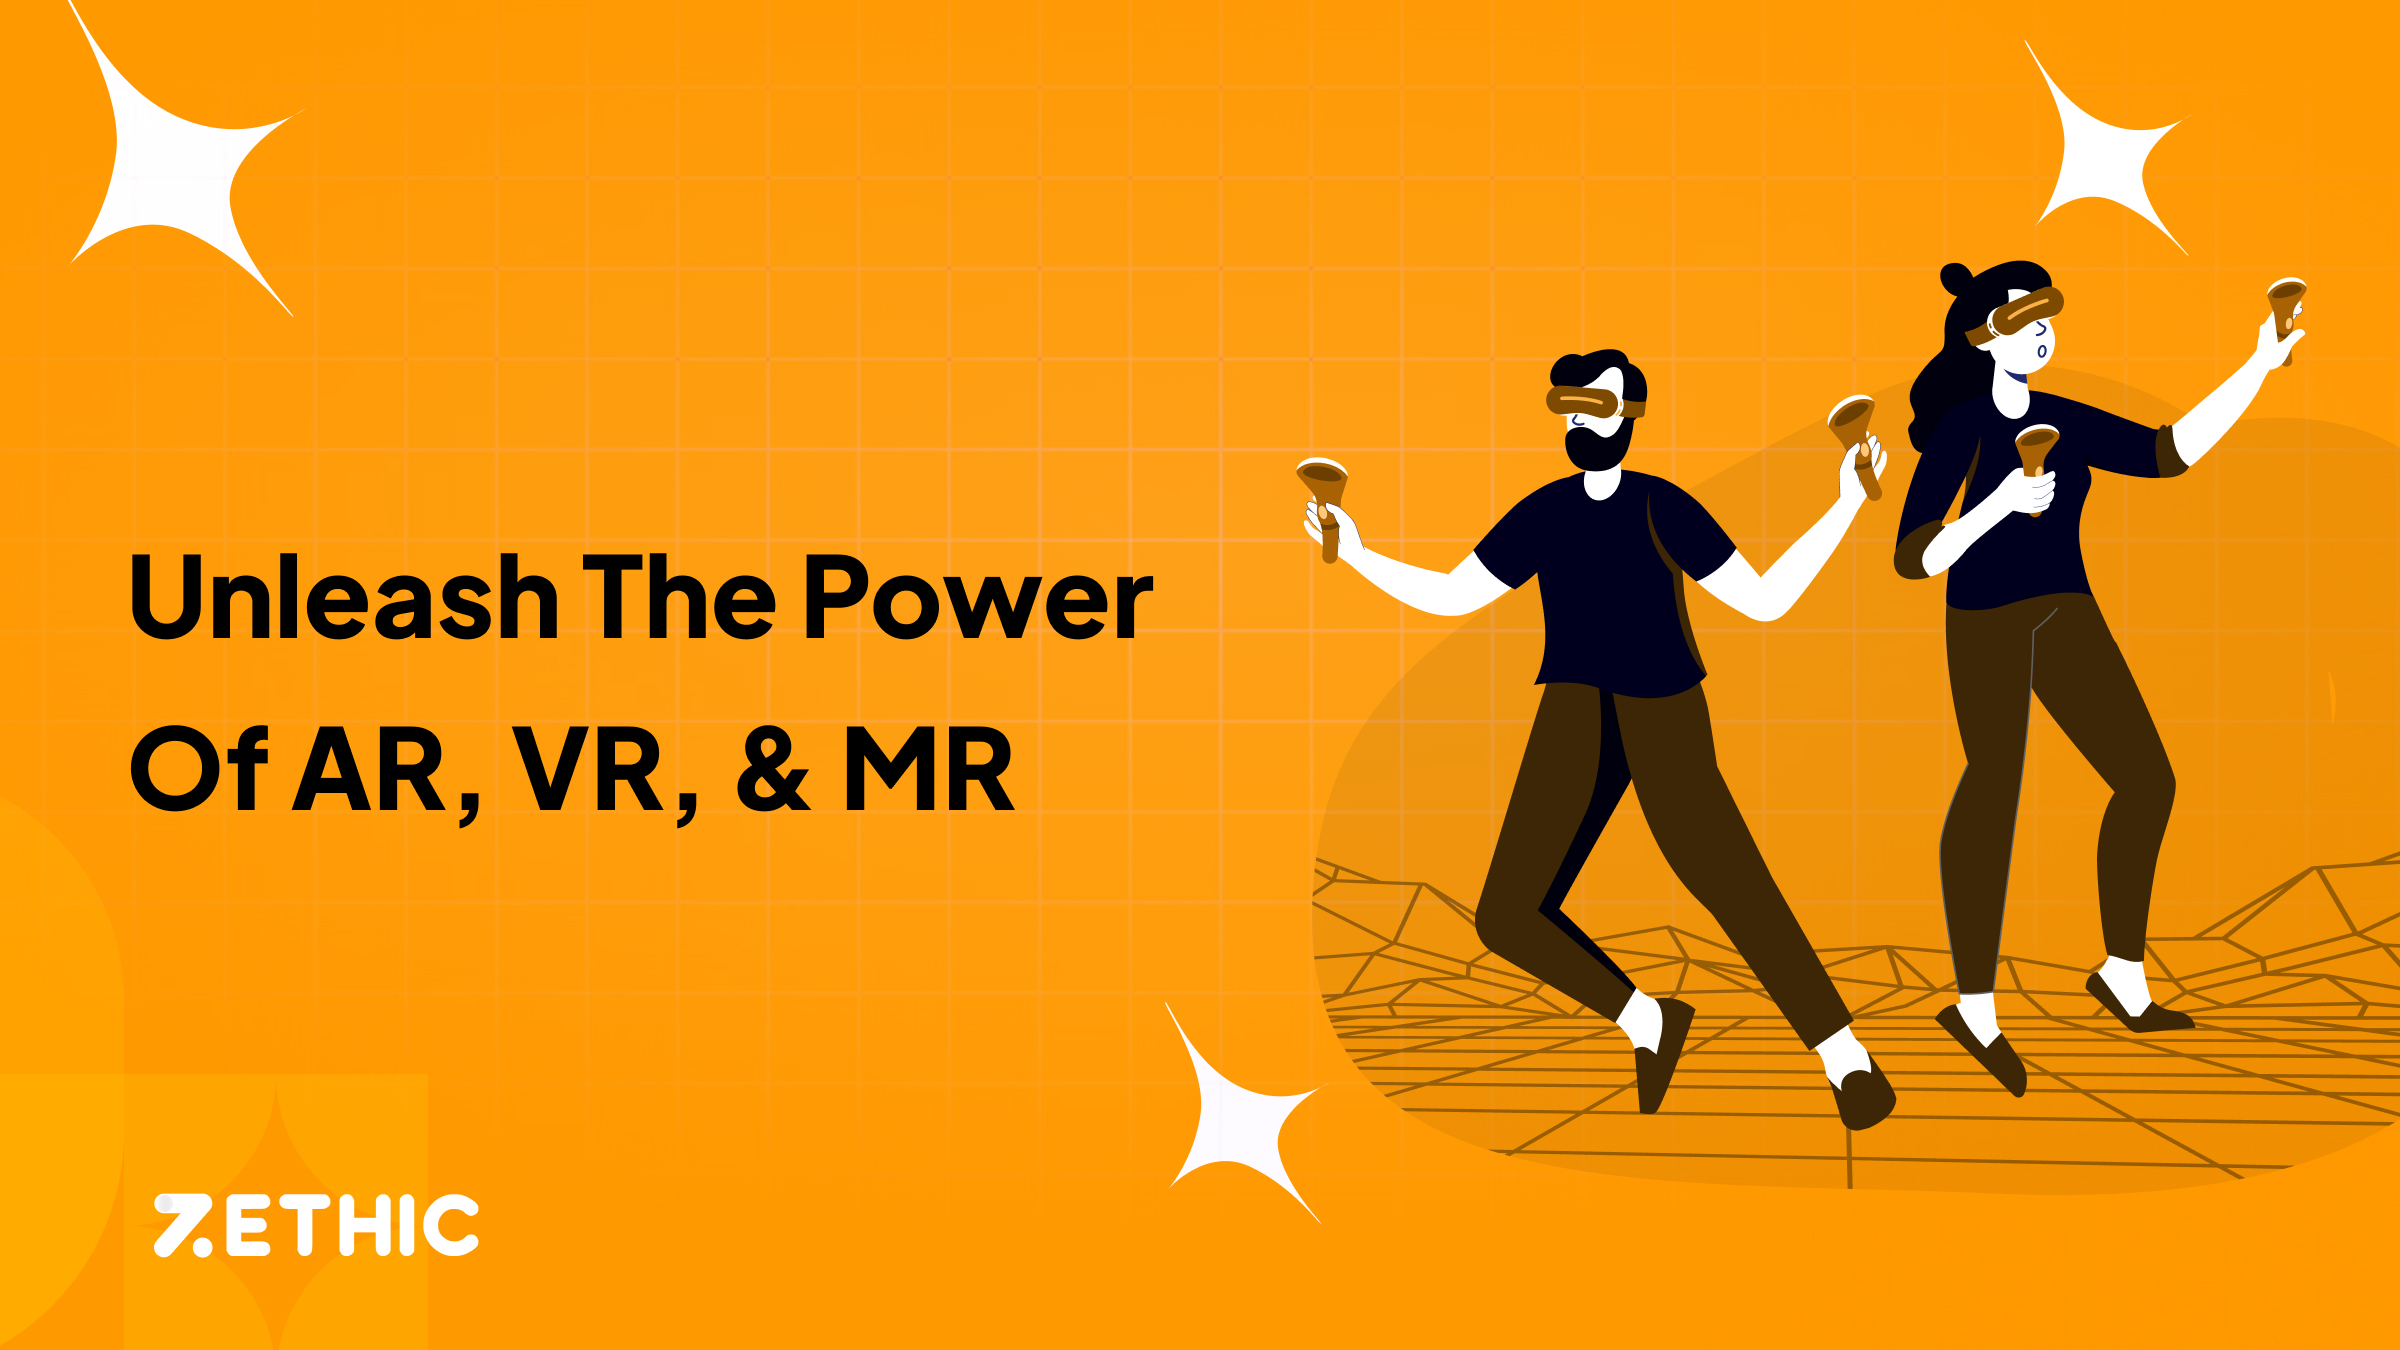 Augmented Reality (AR) vs. Virtual Reality (VR) vs. Mixed Reality (MR): A Concise Comparison